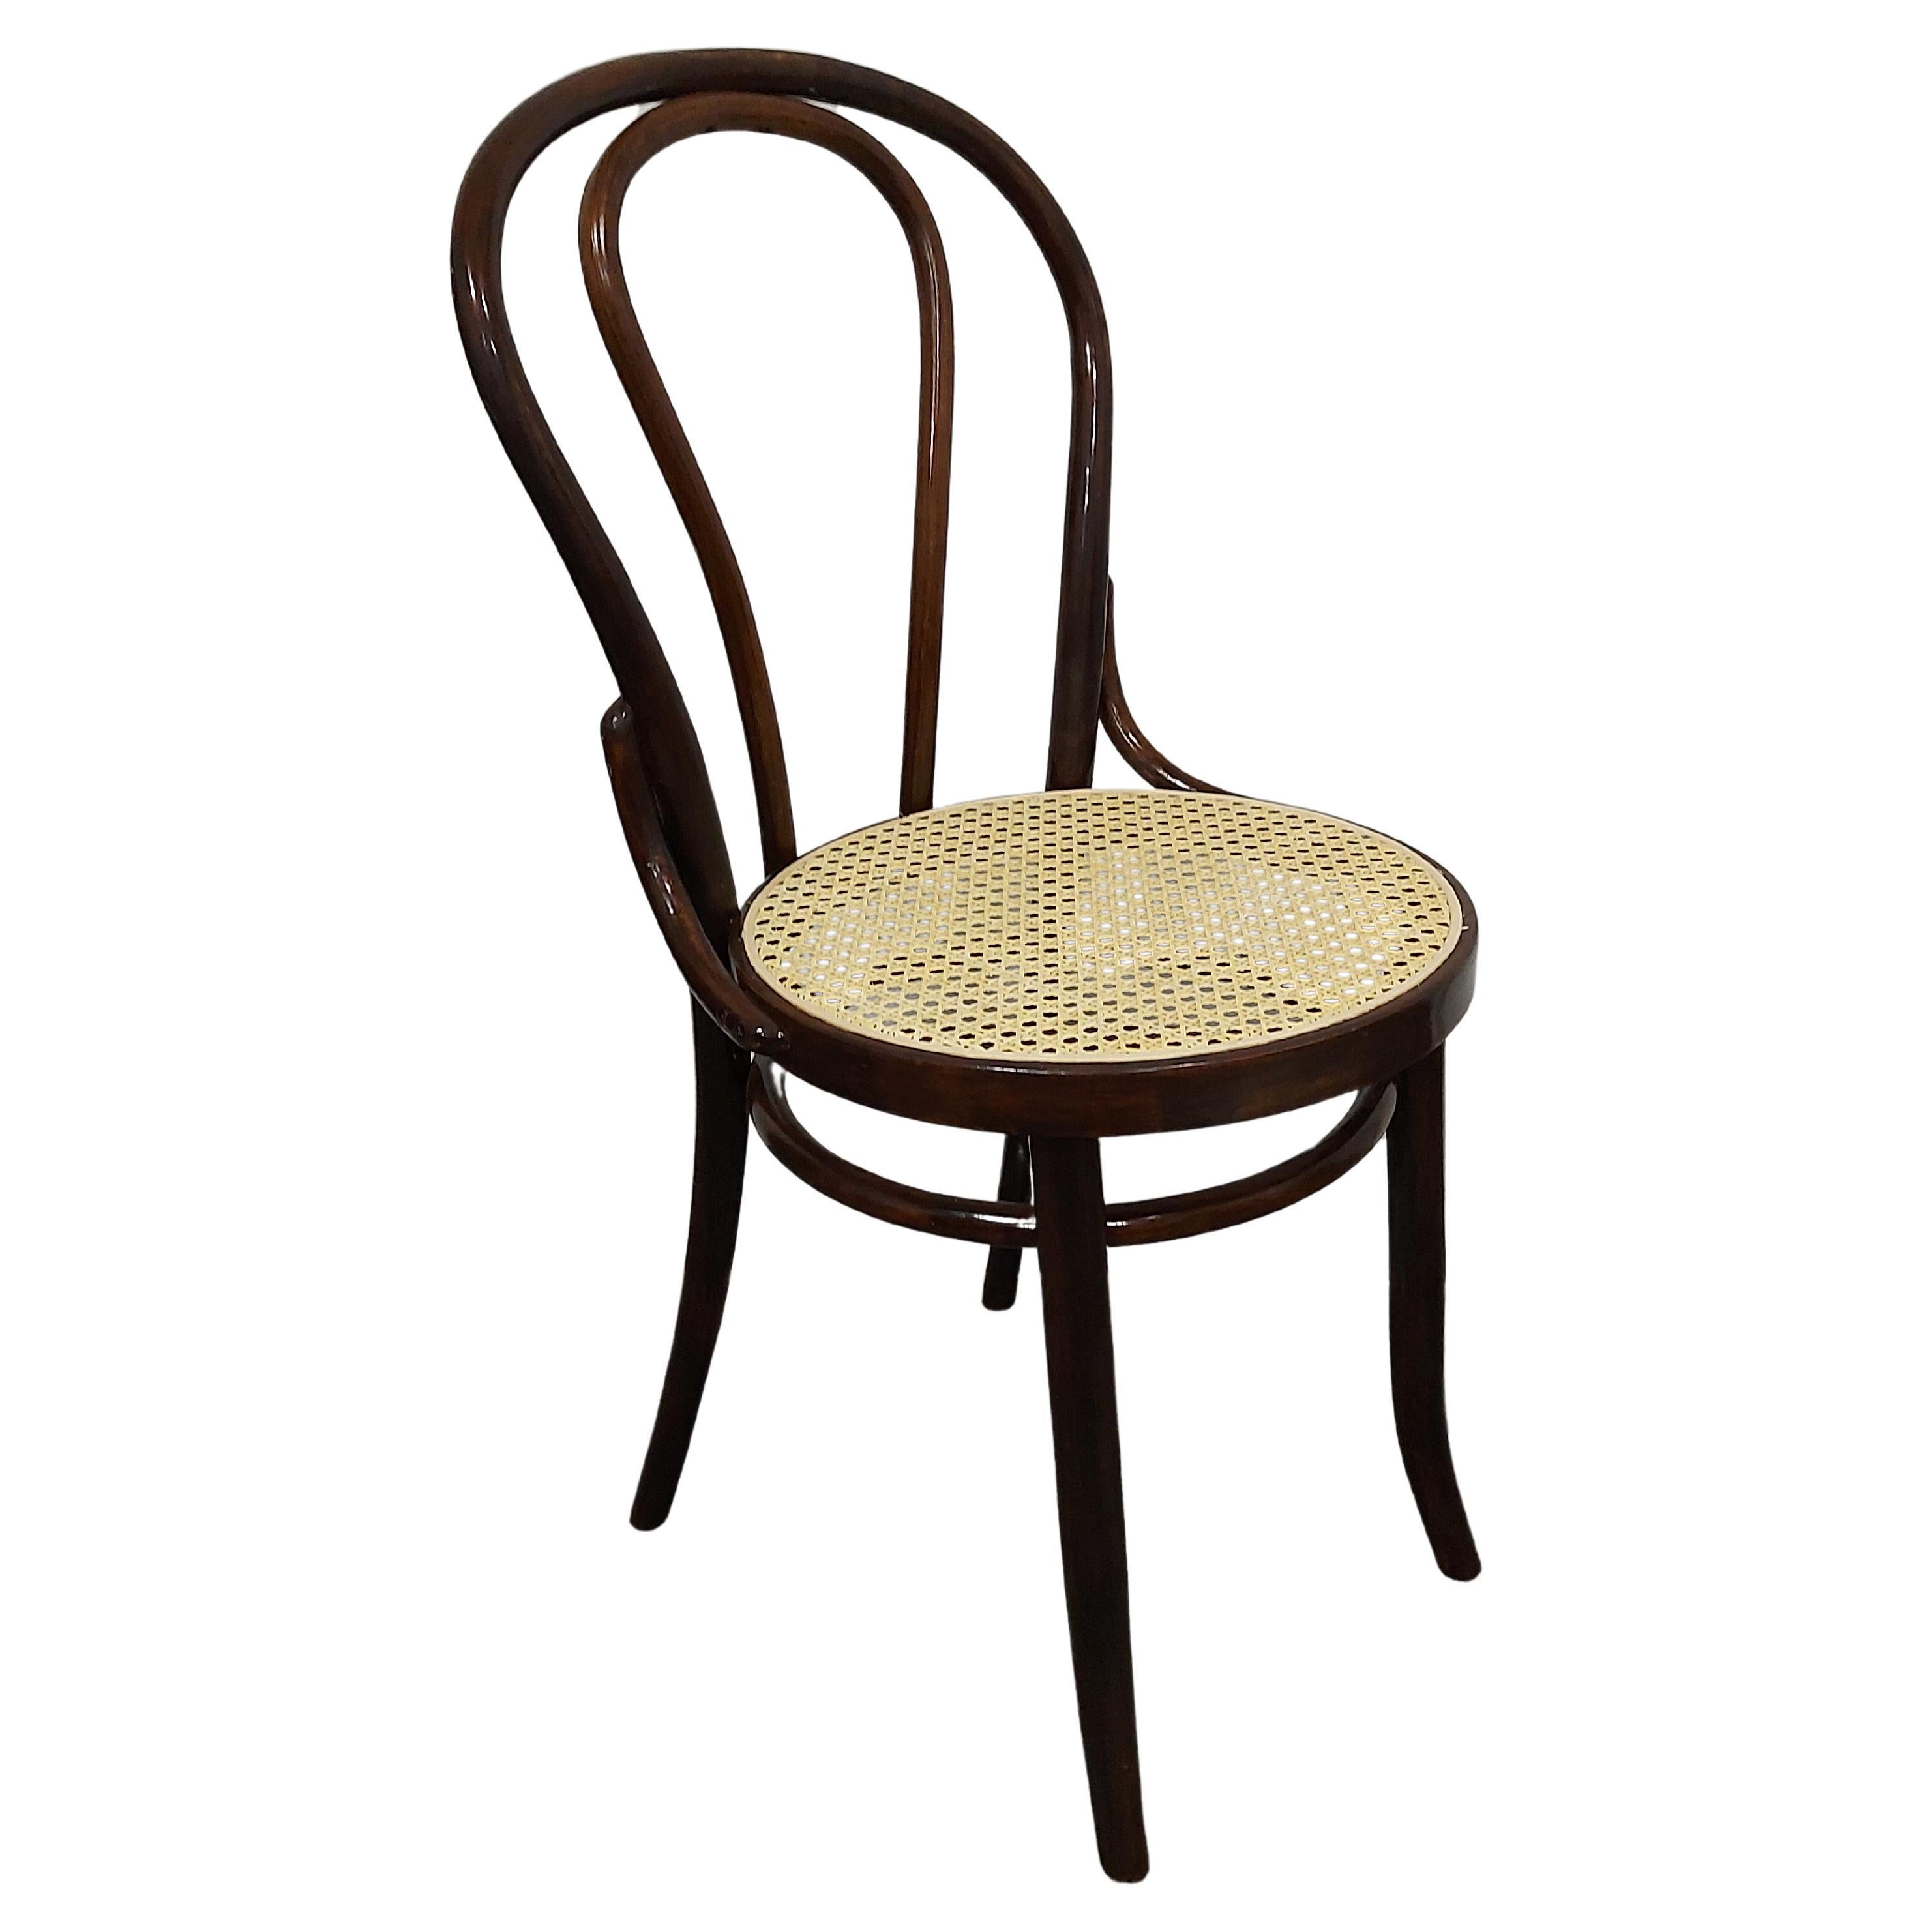 Thonet Dining chair No. 18 "Wide" 1970s